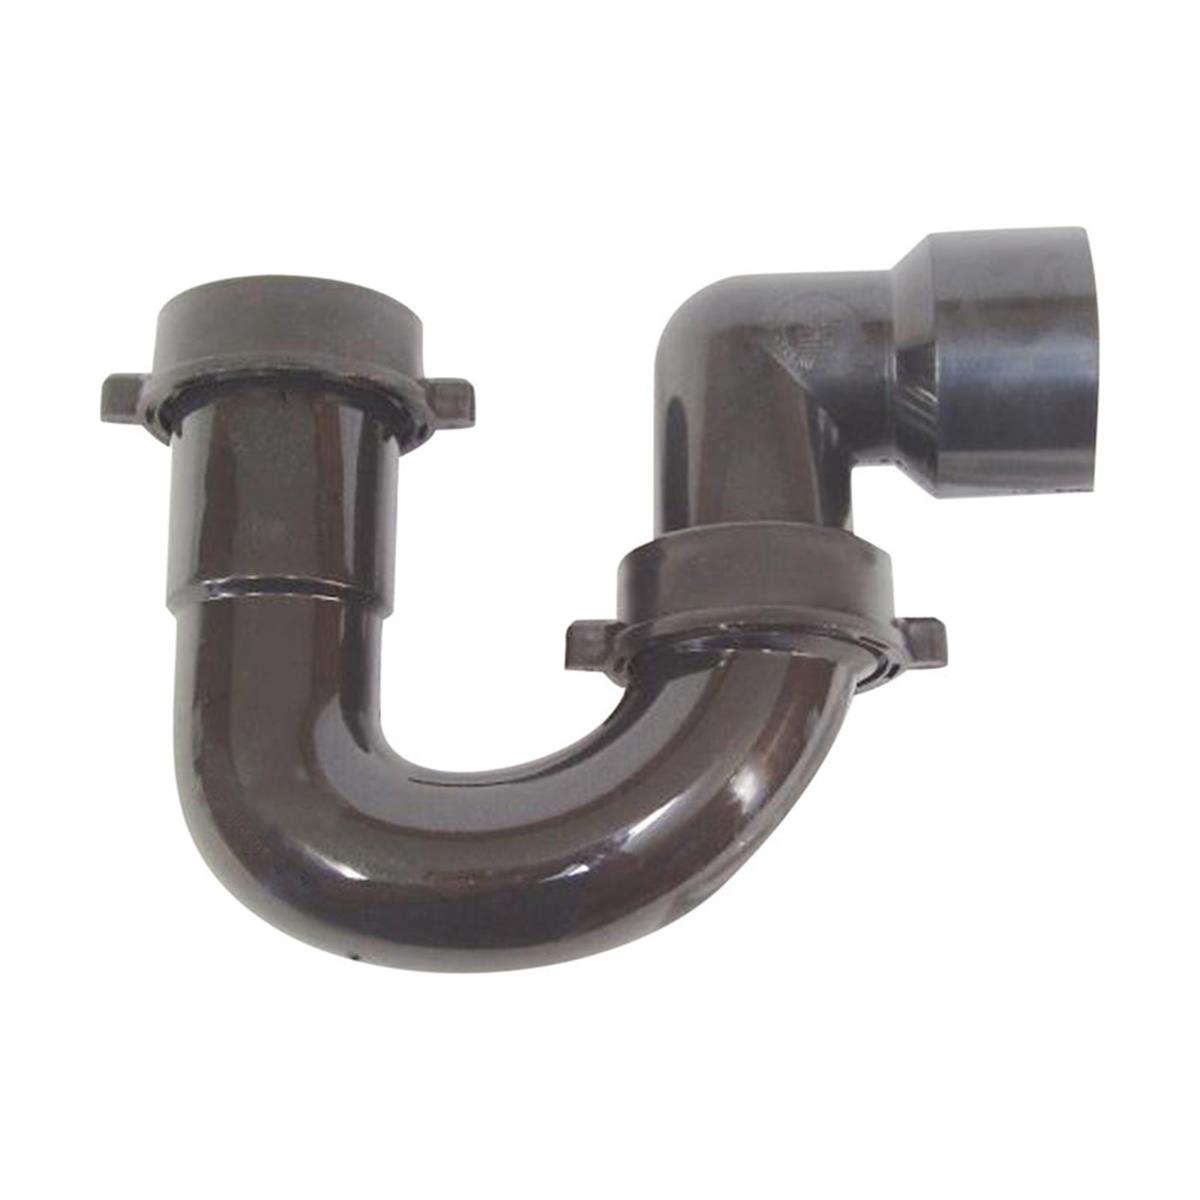 P-686c 1.5 X 1.5 In. Universal Sink Trap